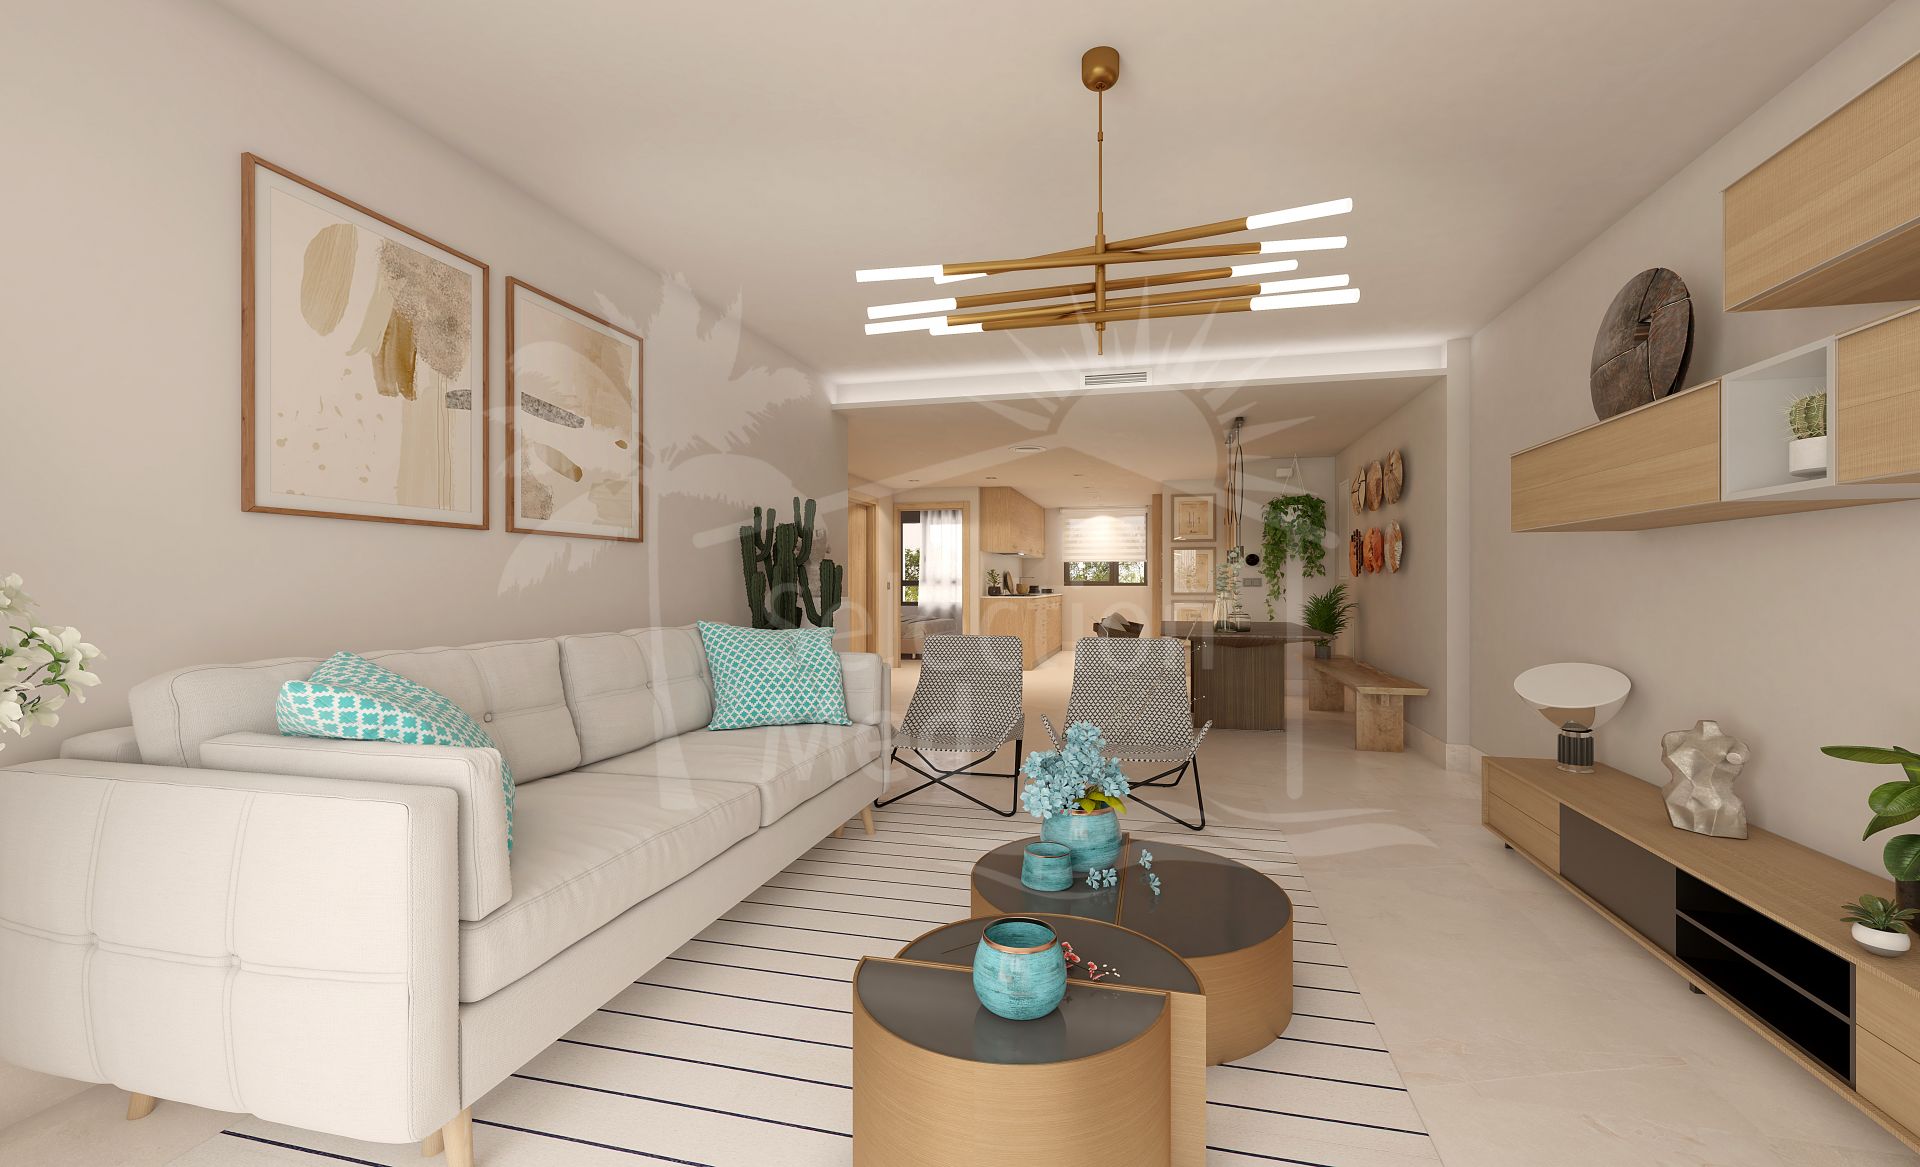 Solemar, contemporary apartments with amazing seaviews in Casares Beach.